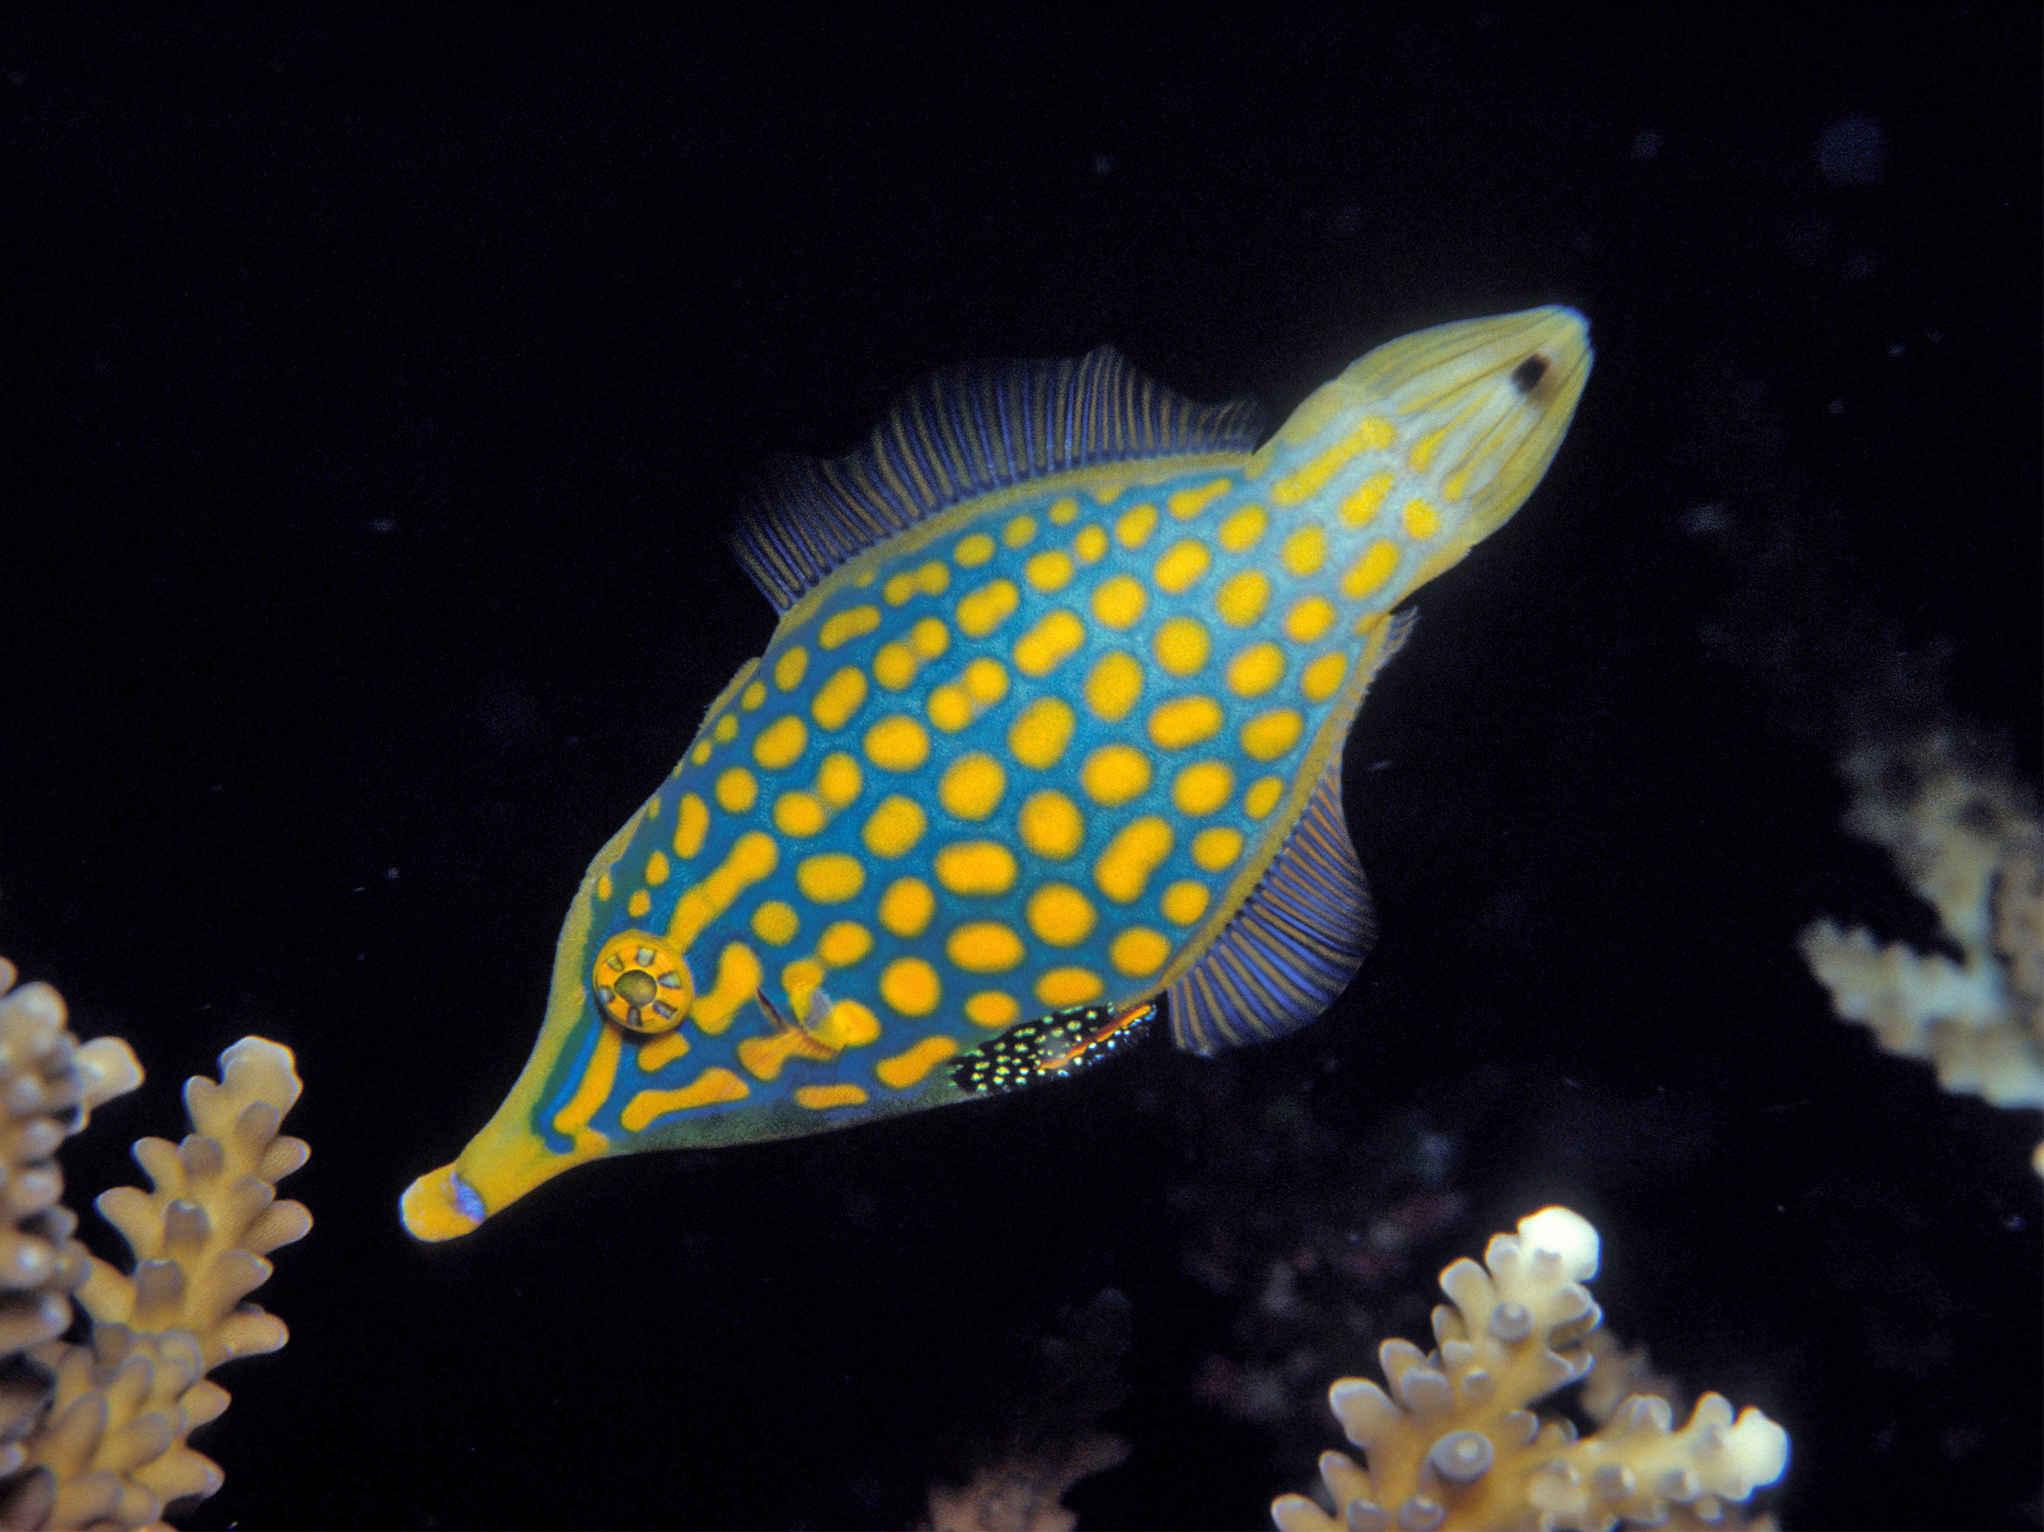 The harlequin filefish uses the previously little-known tactic of 'nasal camouflage' to avoid predators